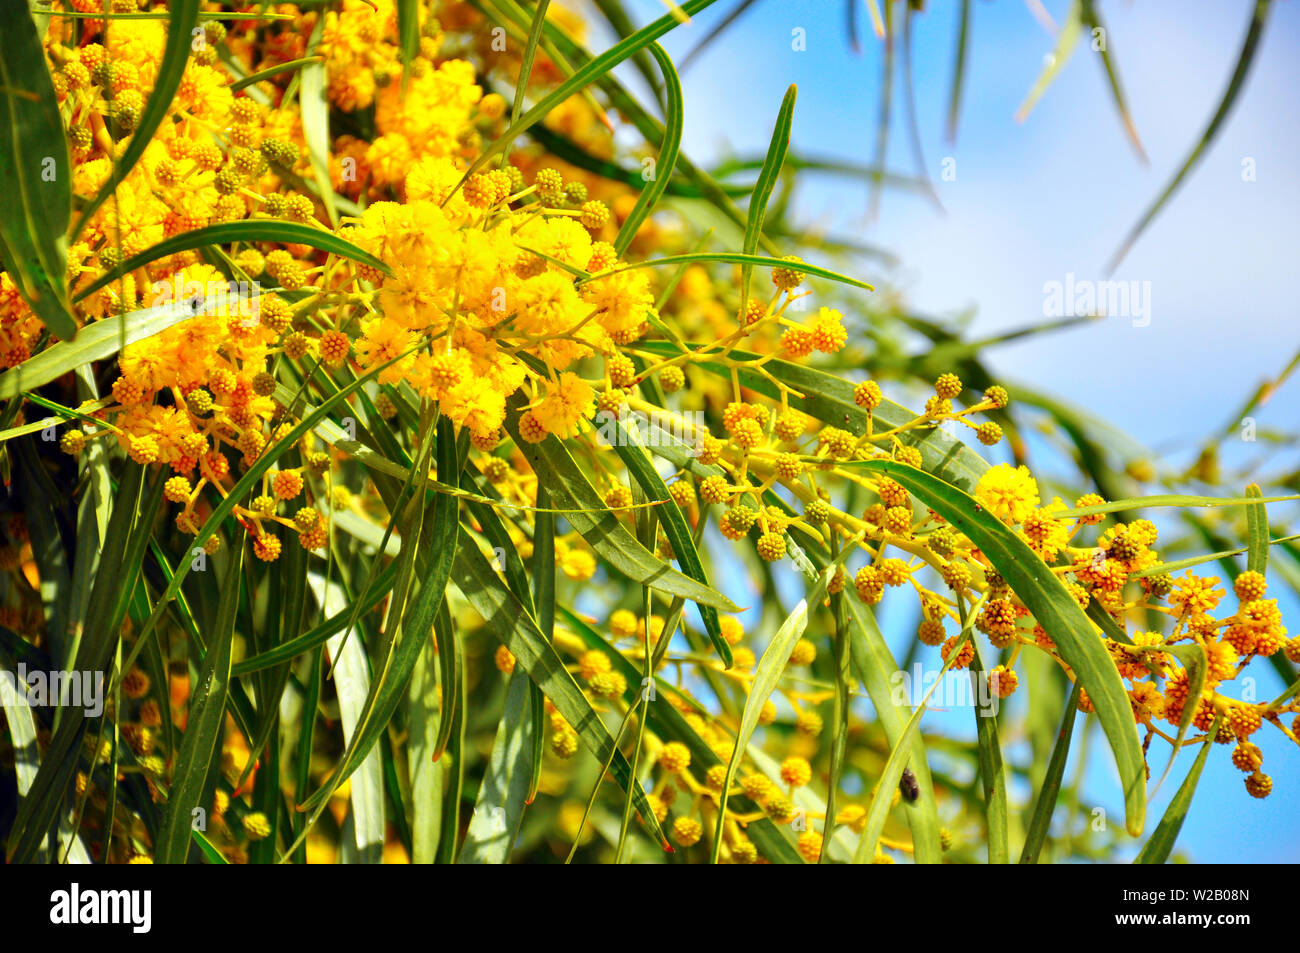 Acacia pycnantha, Golden Wattle, Australian floral emblem that flowers in late winter and spring producing a mass of fragrant, fluffy, golden flowers. Stock Photo